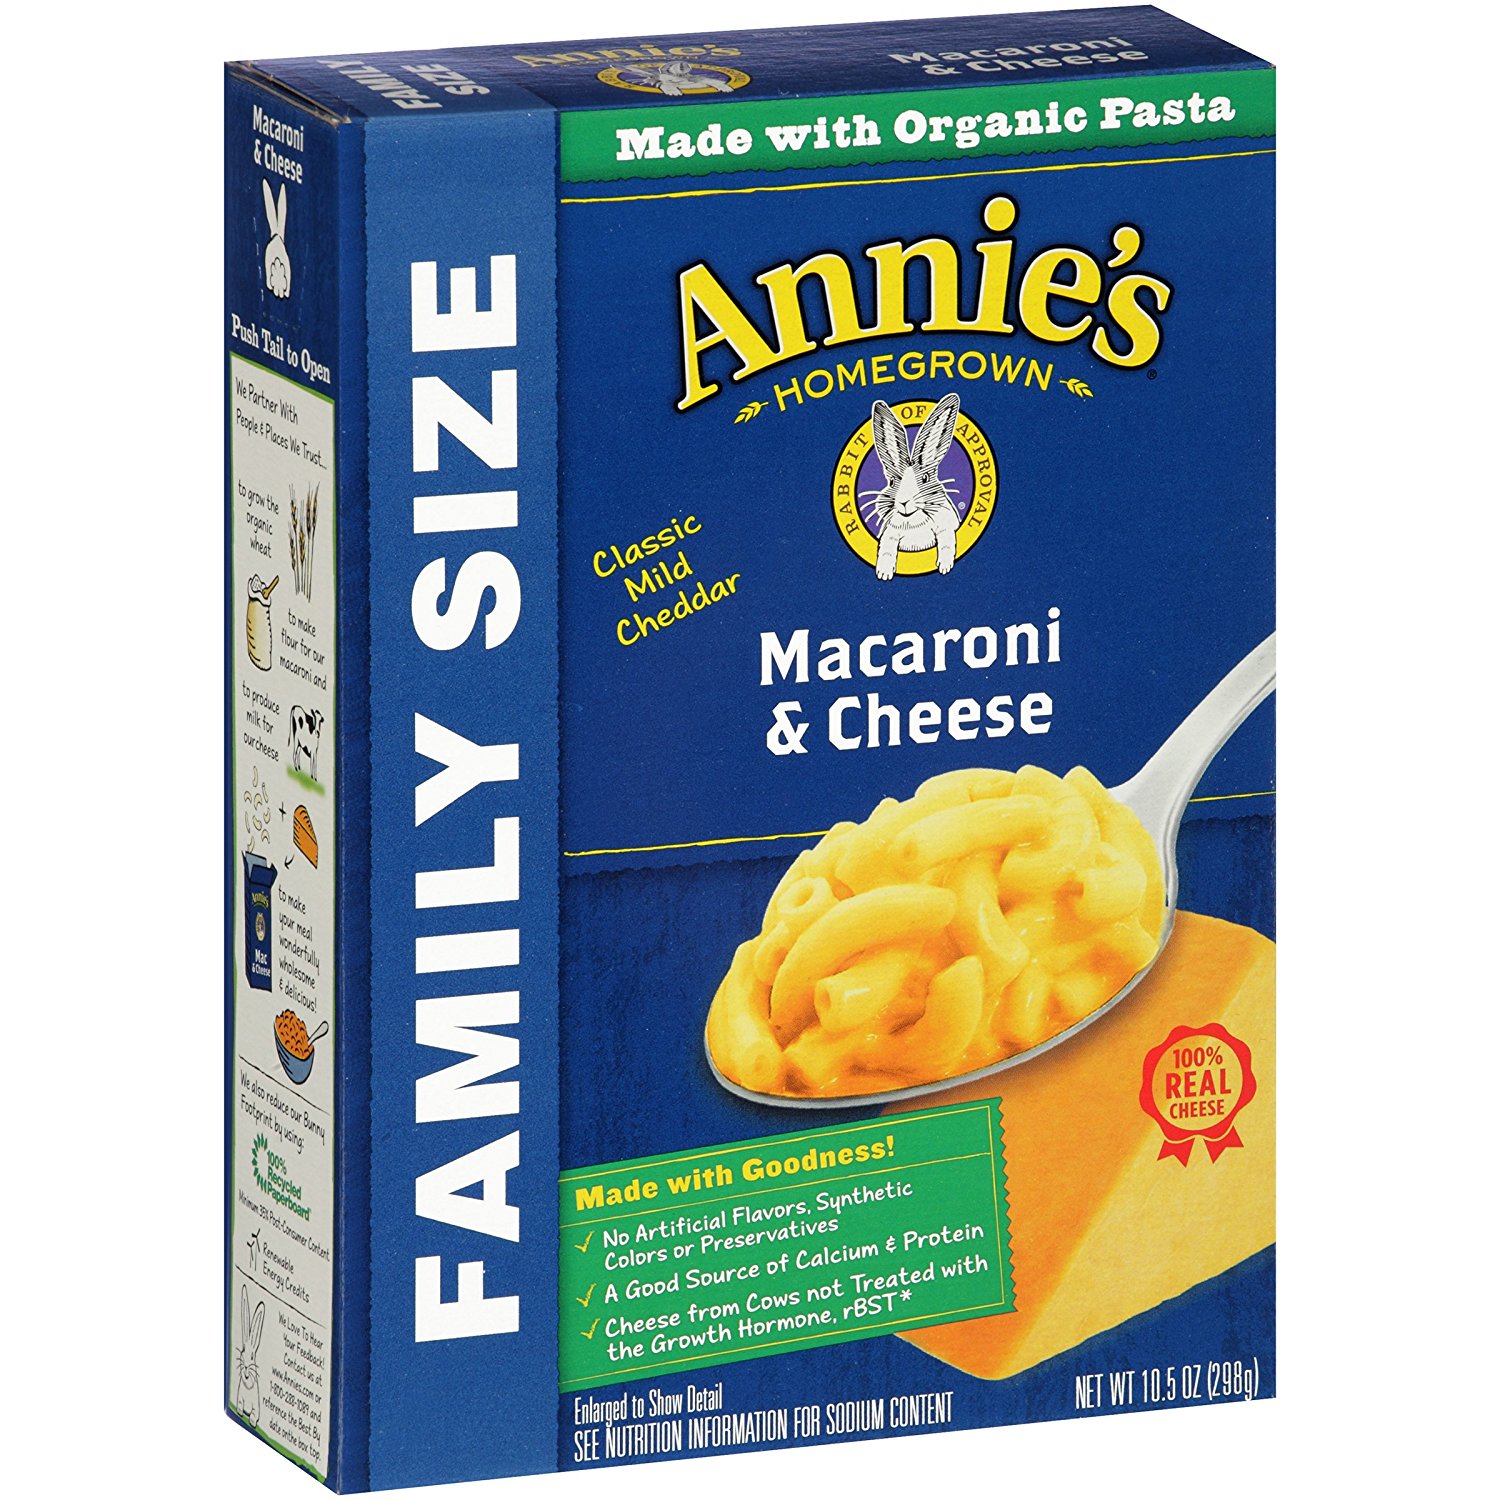 Annie’s Family Size Macaroni and Cheese, Pasta & Classic Mild Cheddar Mac and Cheese – Pack of 6 – Just $8.84!